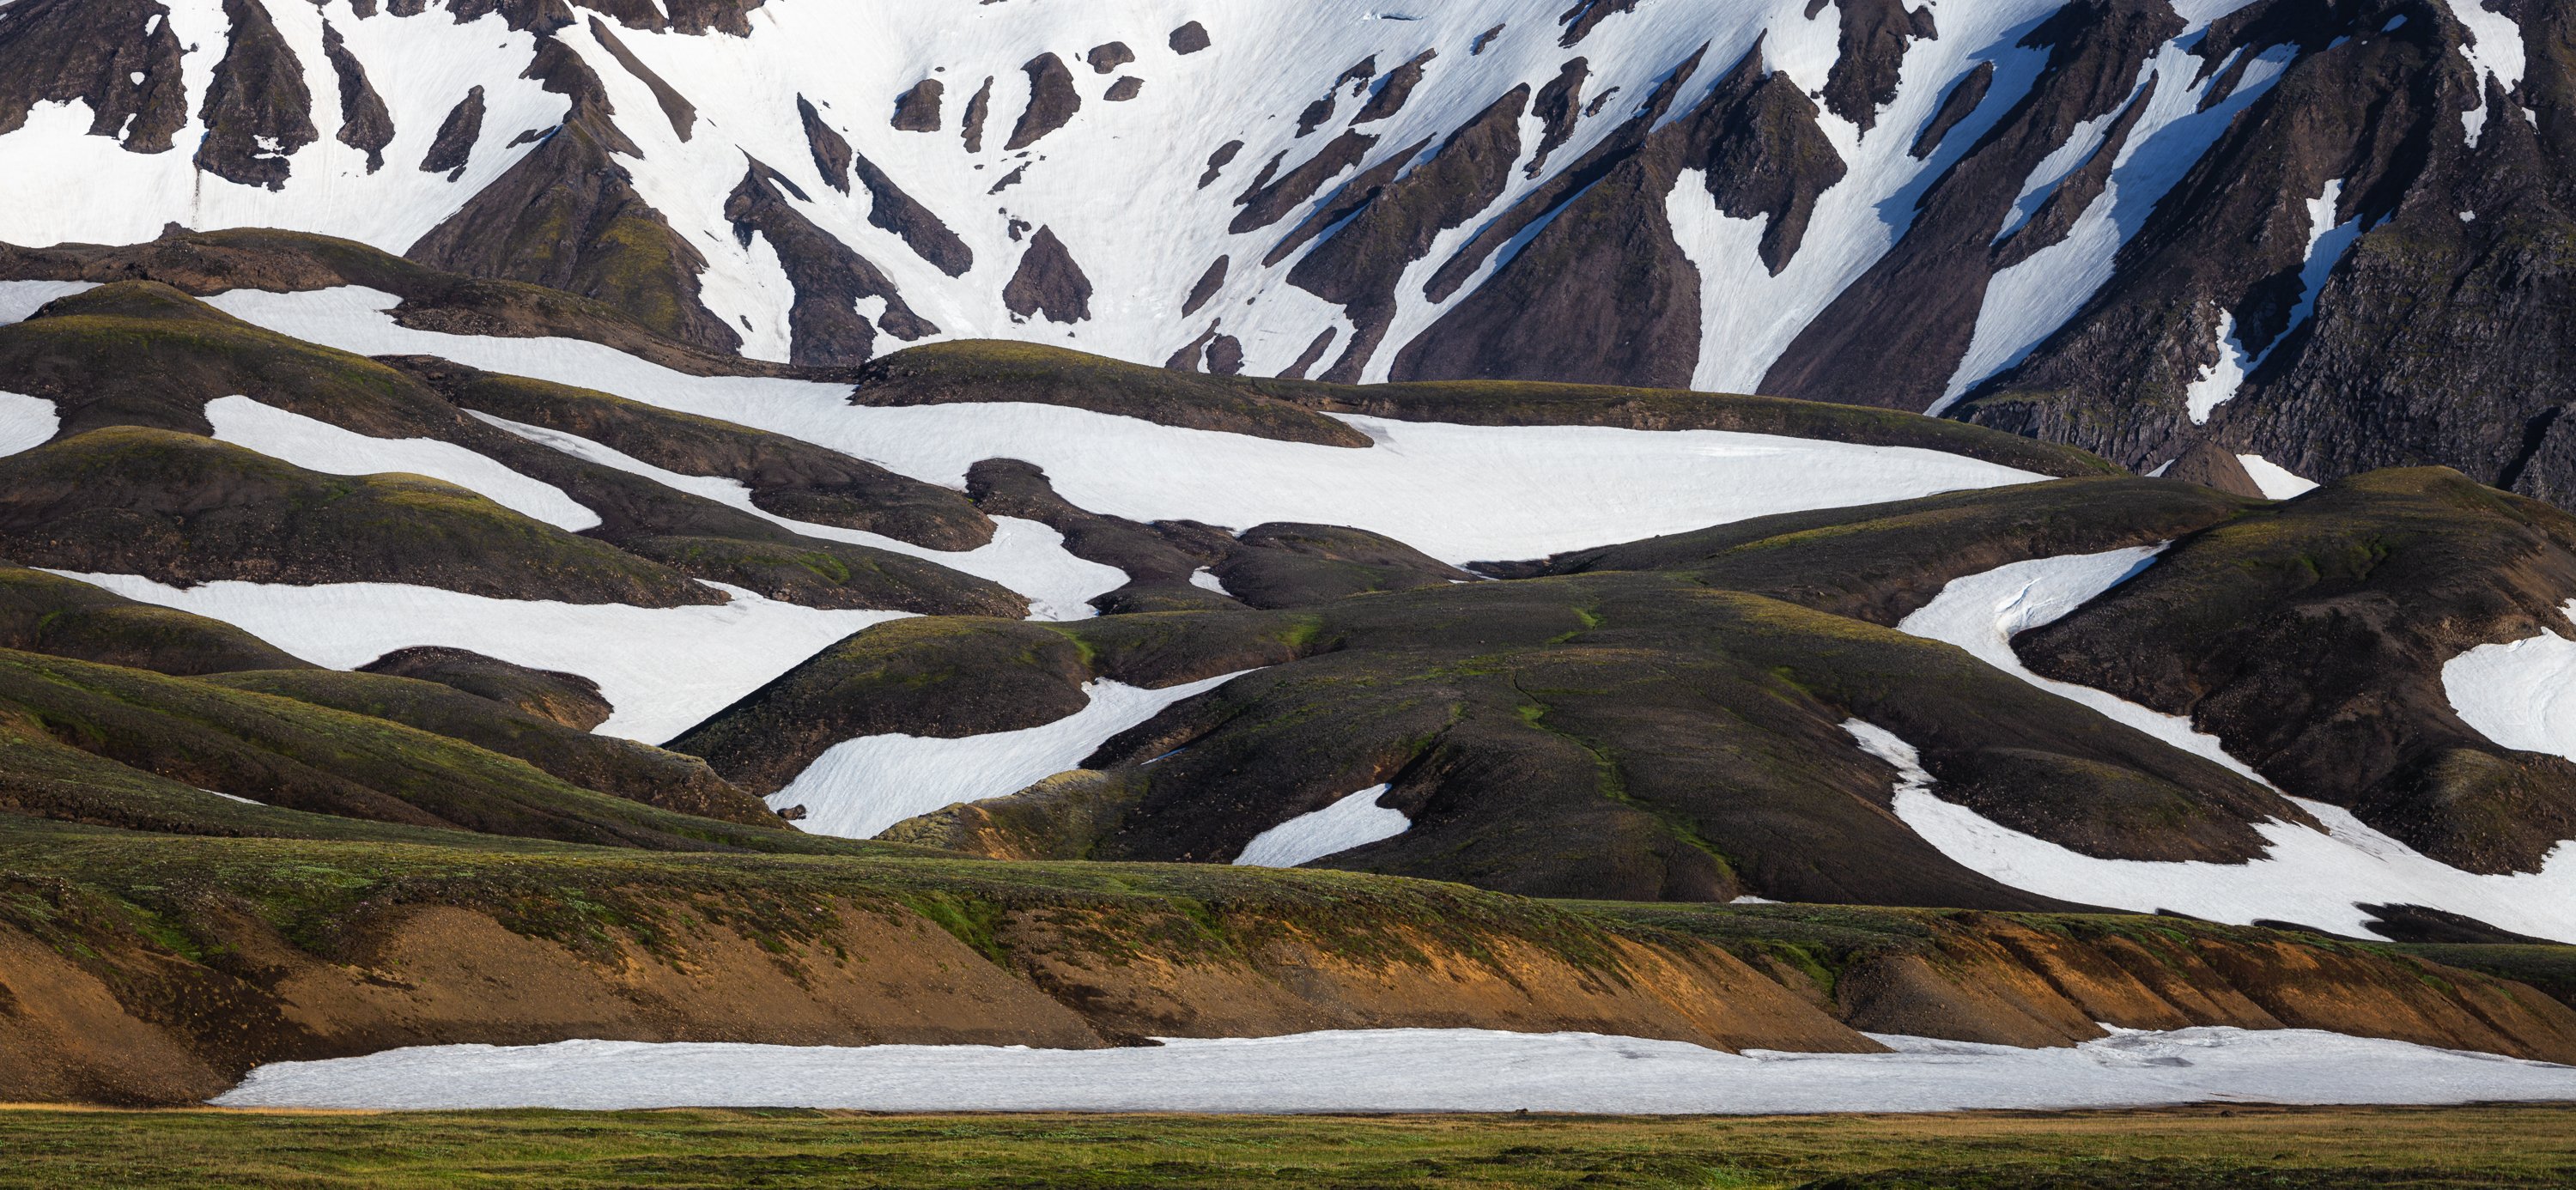 mountains,colorful,abstract,patterns,hills,landscape,iceland,icelandic,summer,, Adrian Szatewicz